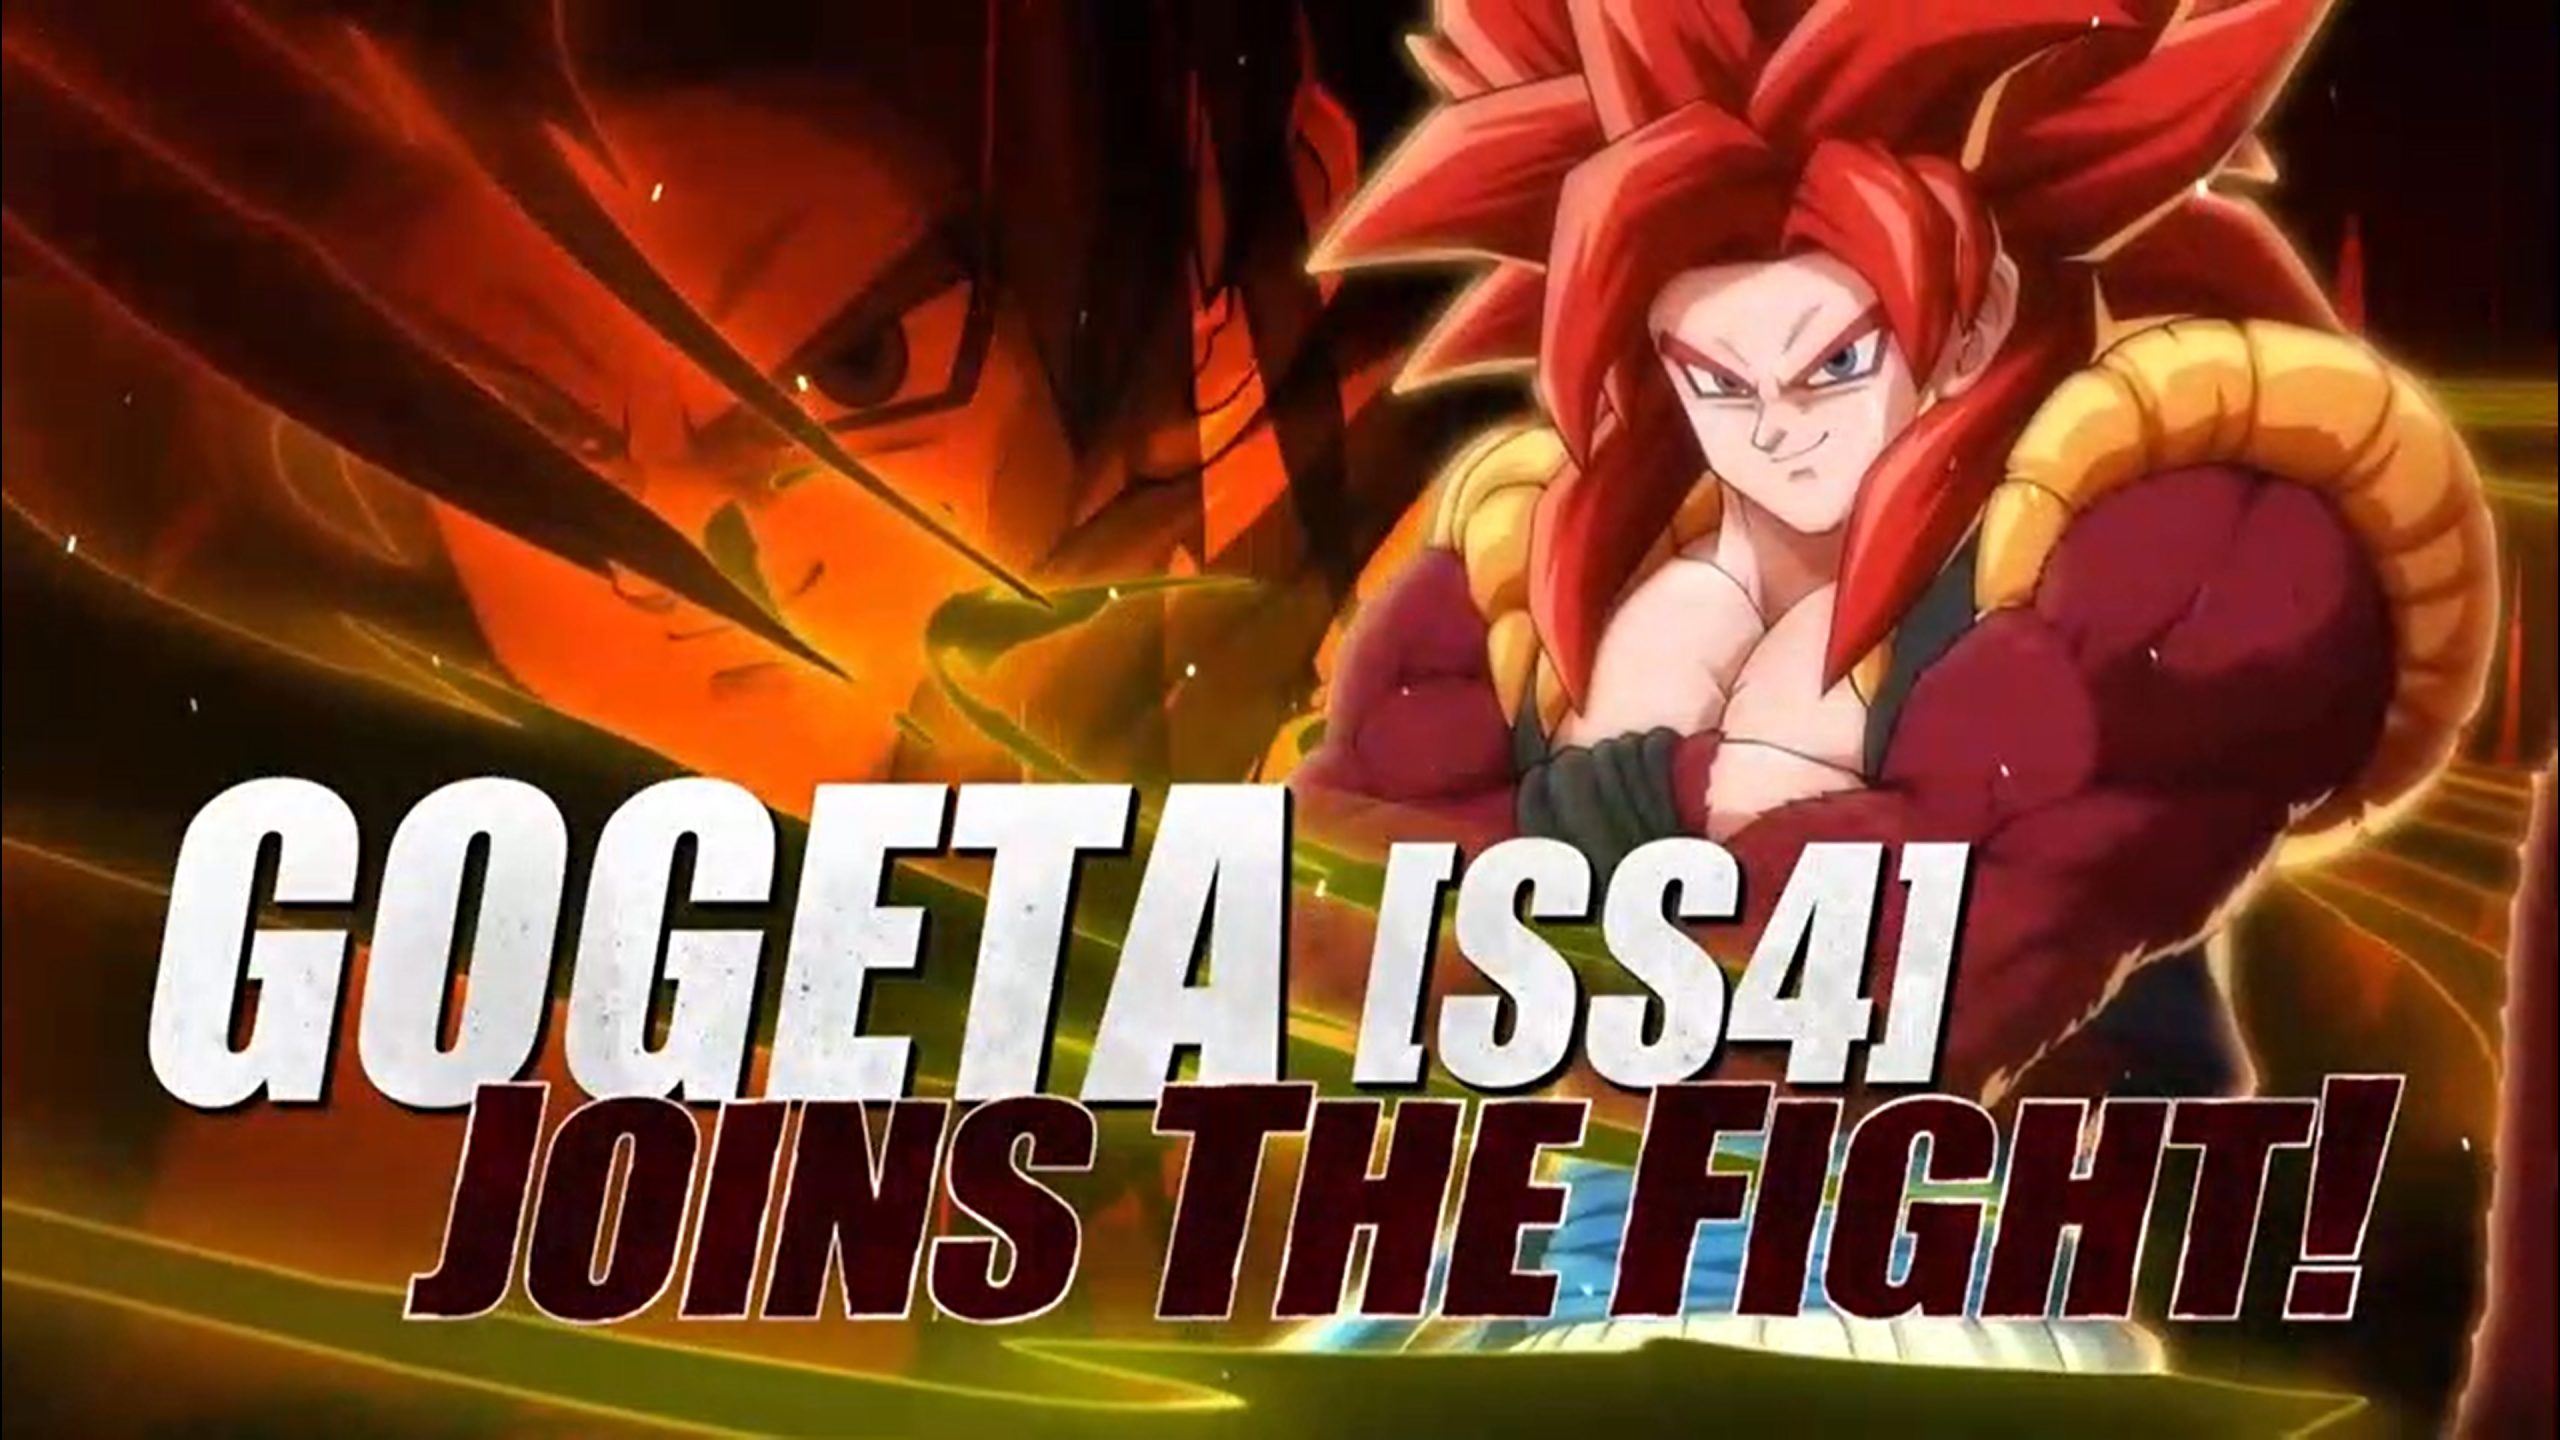 Dragon Ball FighterZ gets Gogeta SS4 later this week